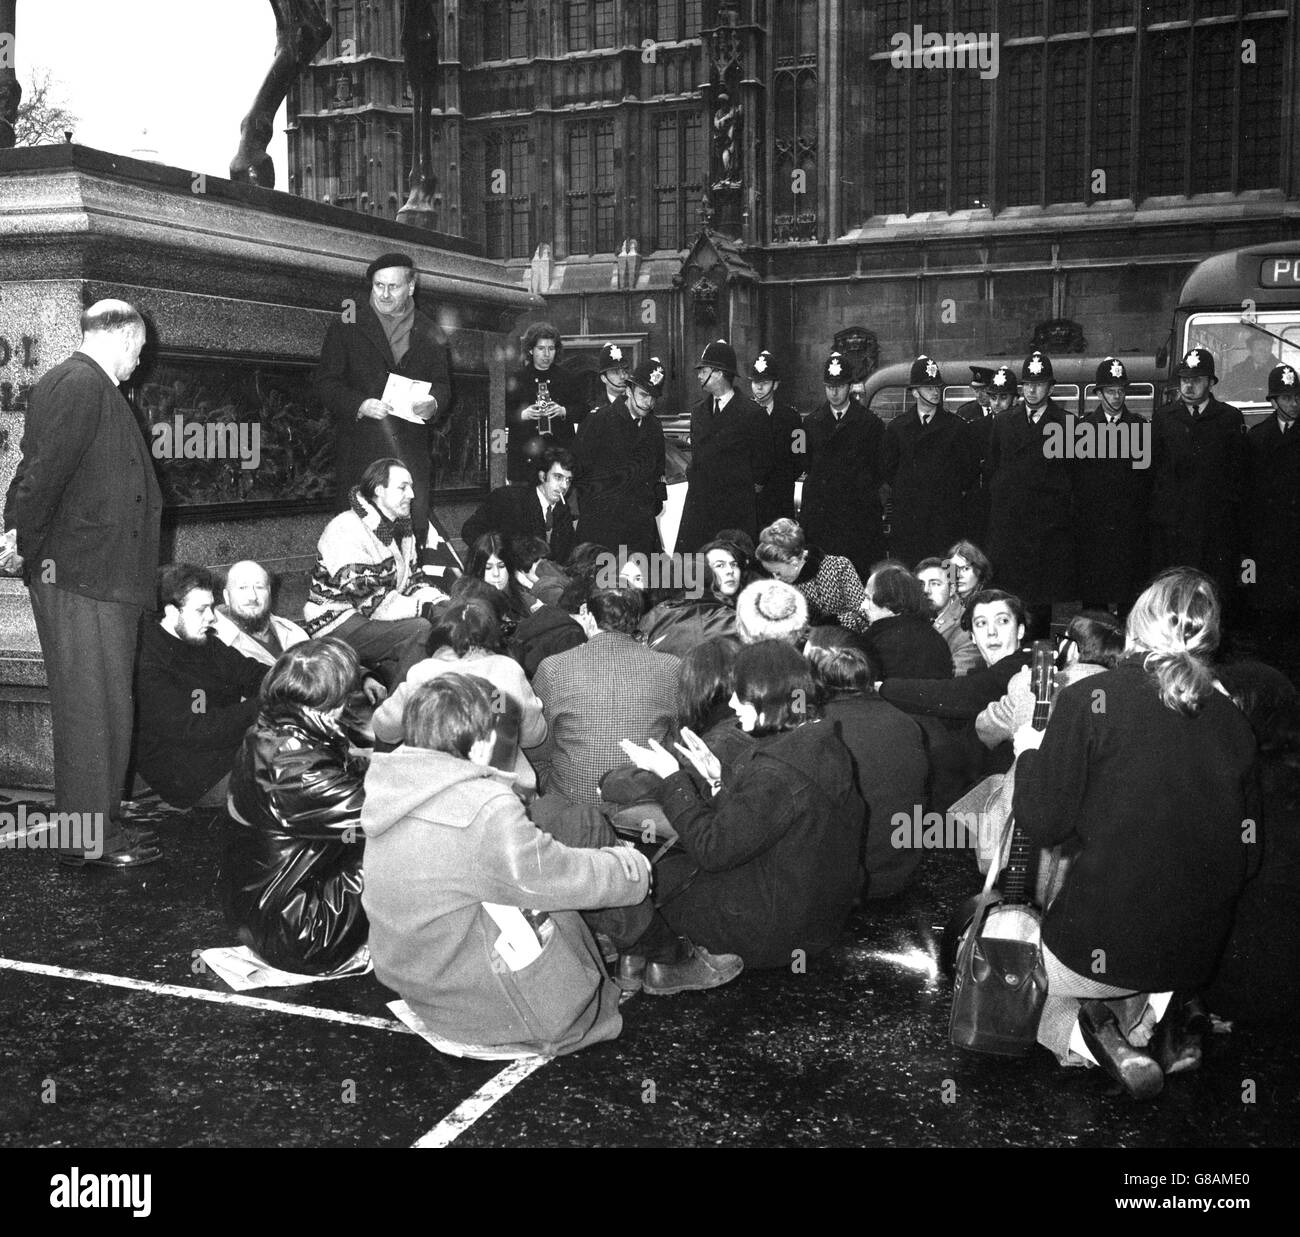 A solid line of police stands above demonstrators seated on the pavement by the Coeur de Lion statue outside the Houses of Parliament in London. This was a demonstration organised by the London Committee of 100 against the war in Vietnam. Though it was intended to hold the meeting in the House of Commons, only three people managed to get in before being escorted away. Police finally ended the sit down by carrying a number of demonstrators into a van. A number of people were charged with obstructing the highway. Stock Photo